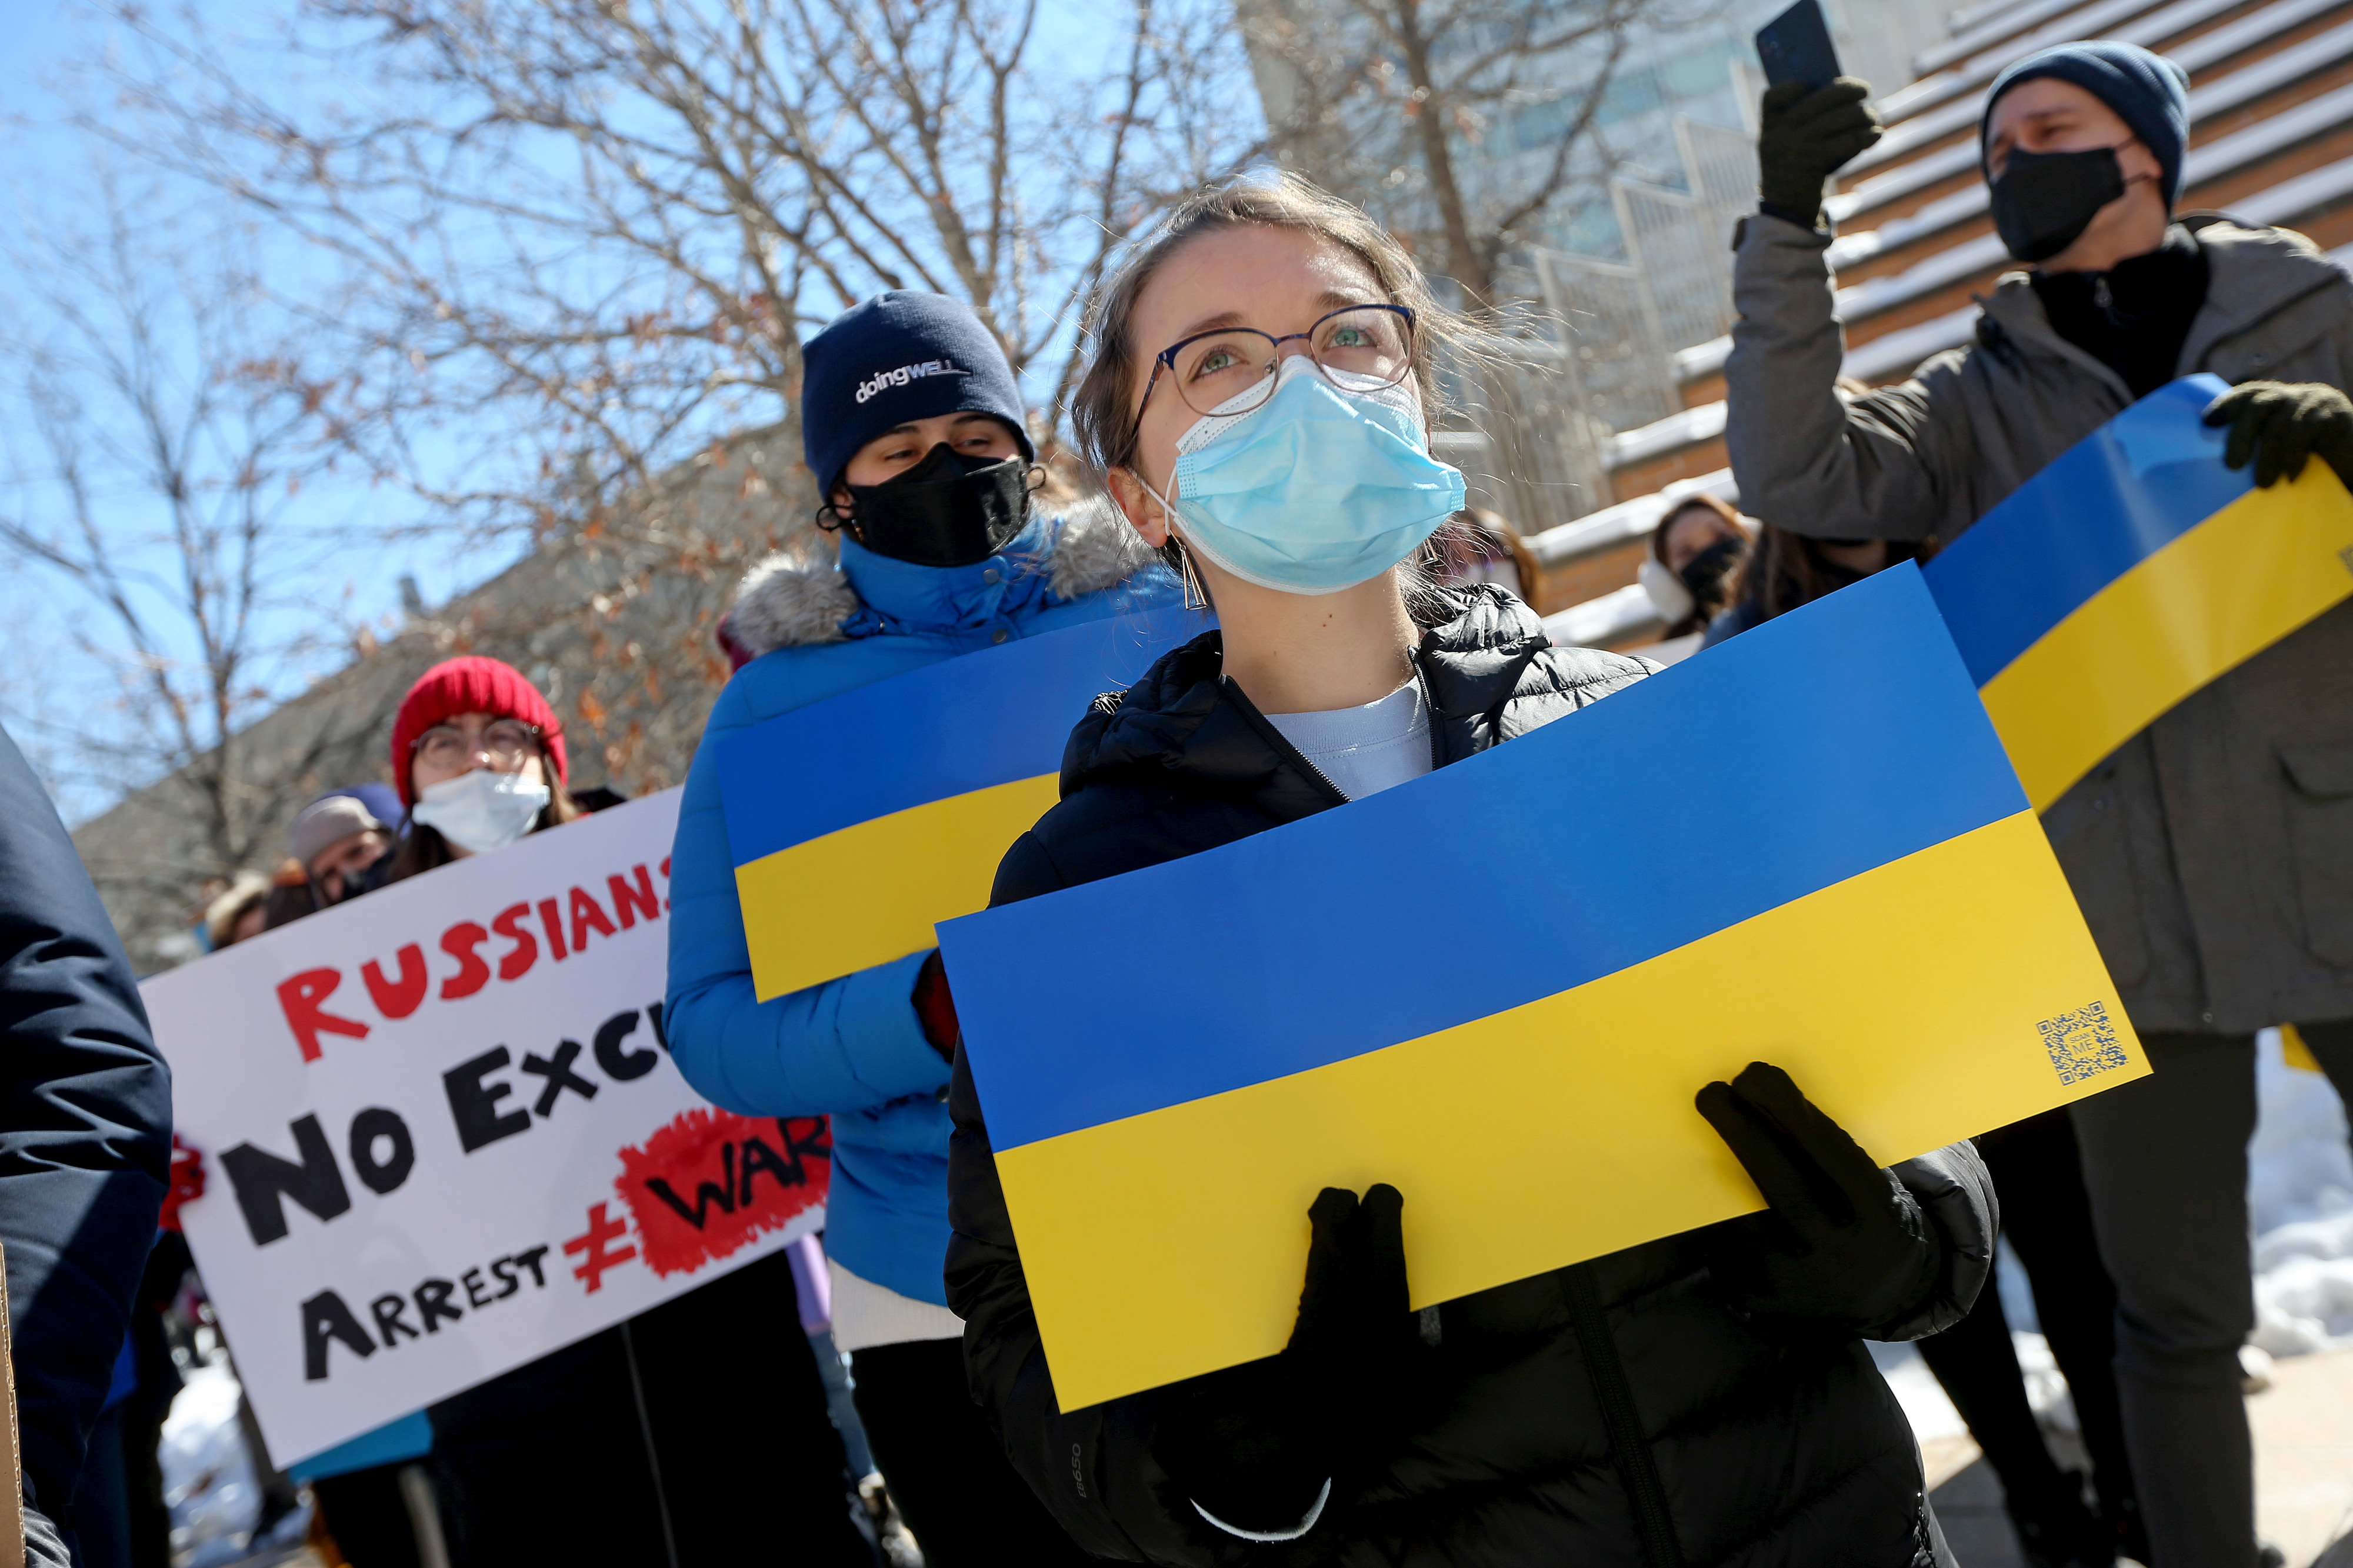 Students from MIT protest Russia's invasion of Ukraine on Feb. 28, in Cambridge, Mass. (Matt Stone—MediaNews Group/Getty Images)